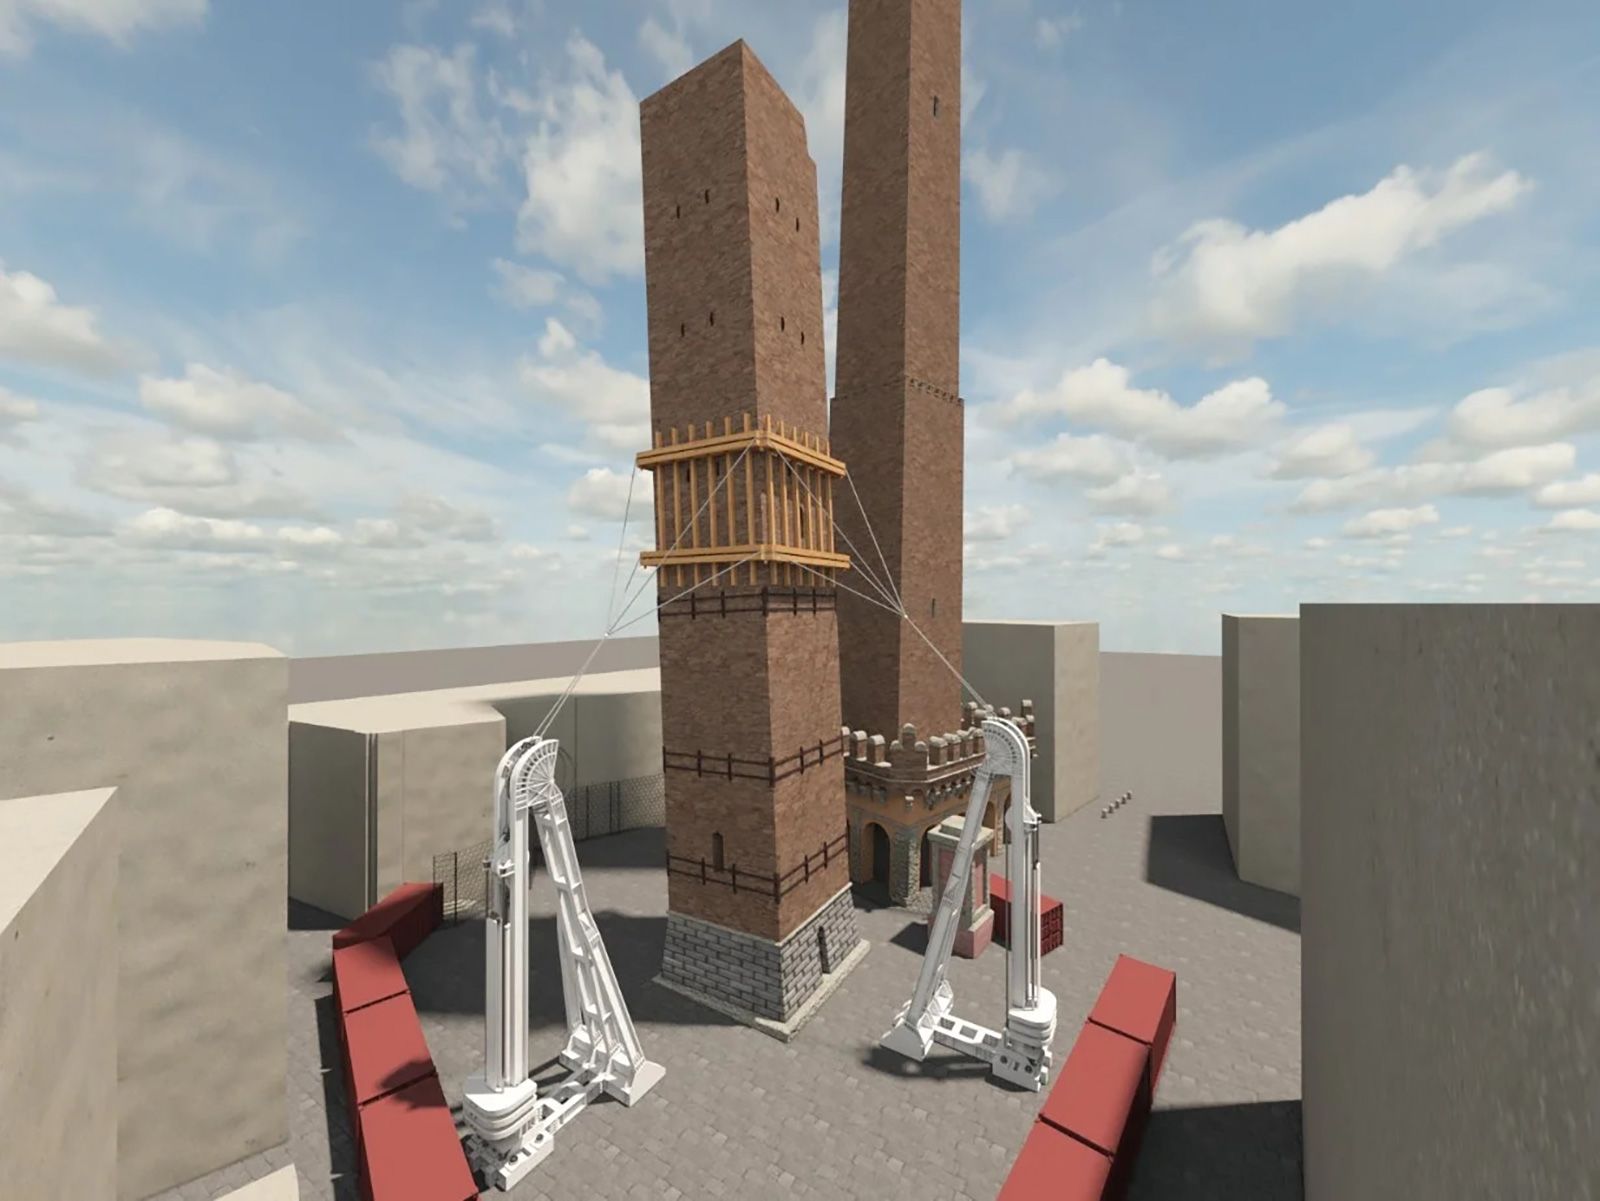 A rendering showing how the equipment from the Tower of Pisa will be used on the Garisenda tower.